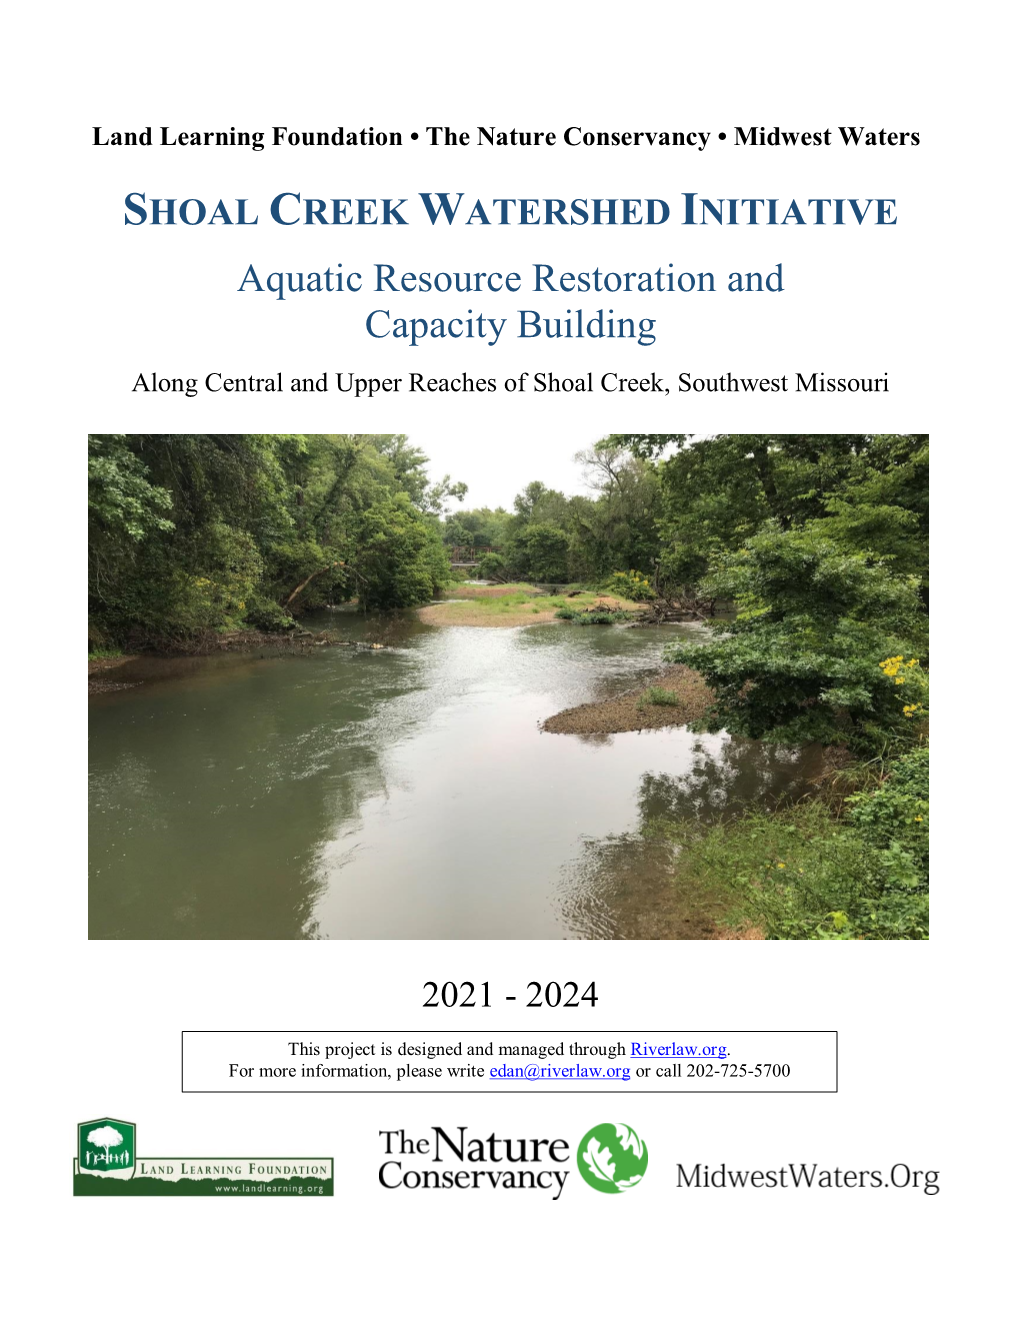 Aquatic Resource Restoration and Capacity Building Along Central and Upper Reaches of Shoal Creek, Southwest Missouri